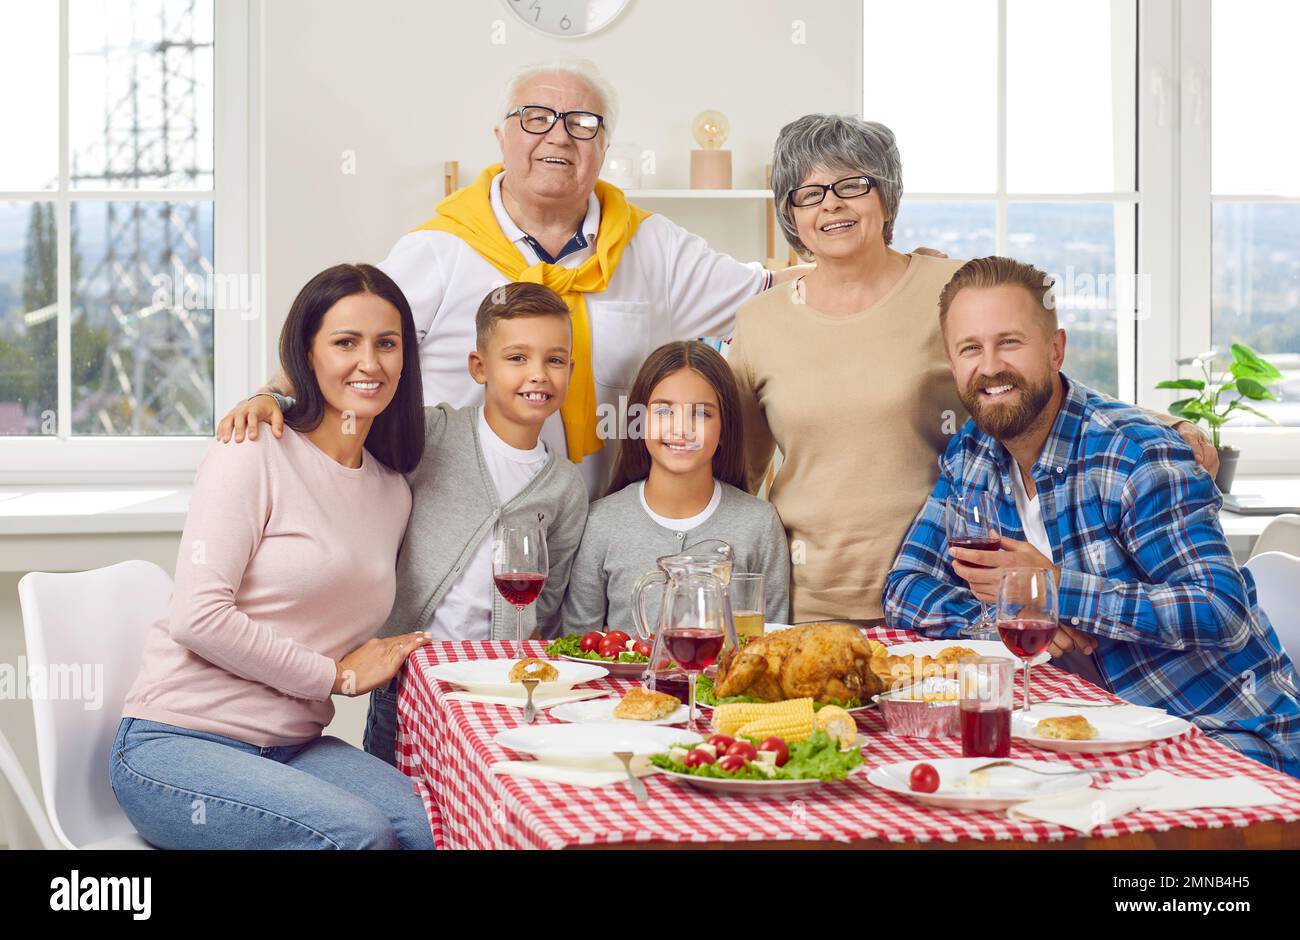 Portrait of happy family of three generations who celebrate Thanksgiving together. Stock Photo